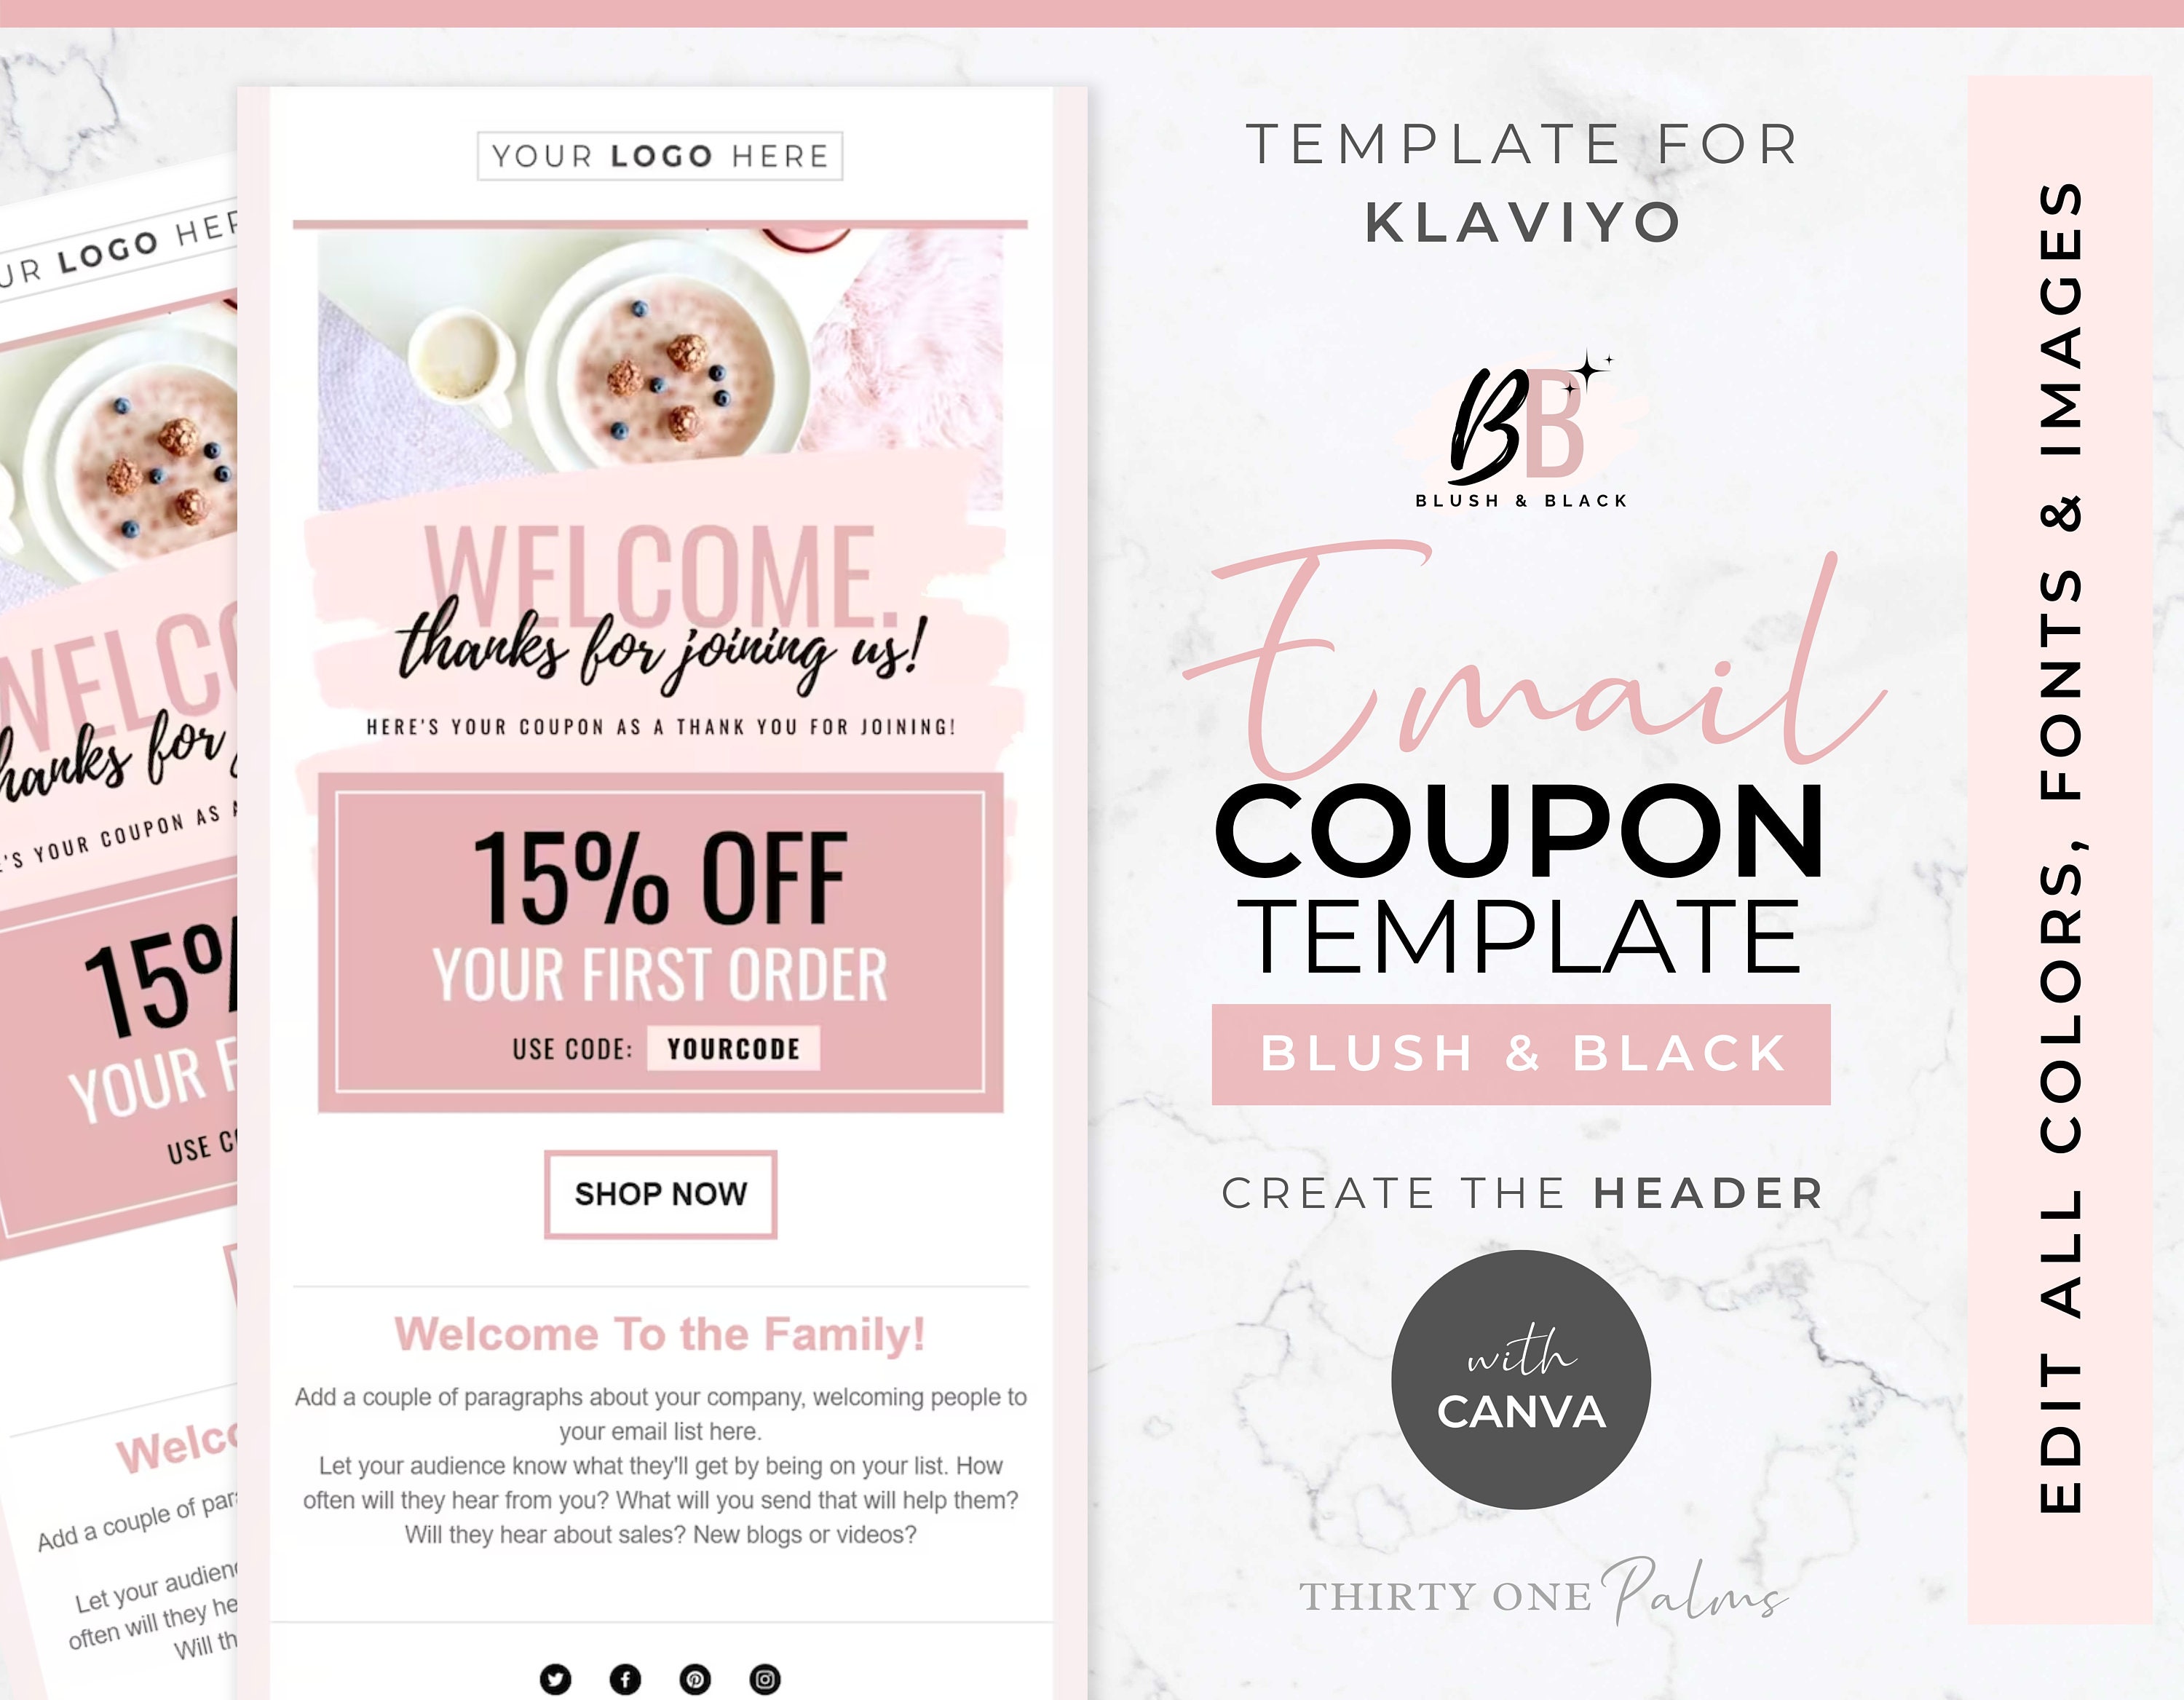 Email Template for Klaviyo and Canva Coupon, Welcome Email, Marketing  Template, Email Marketing, Email Newsletter, Campaign, Blush & Black 